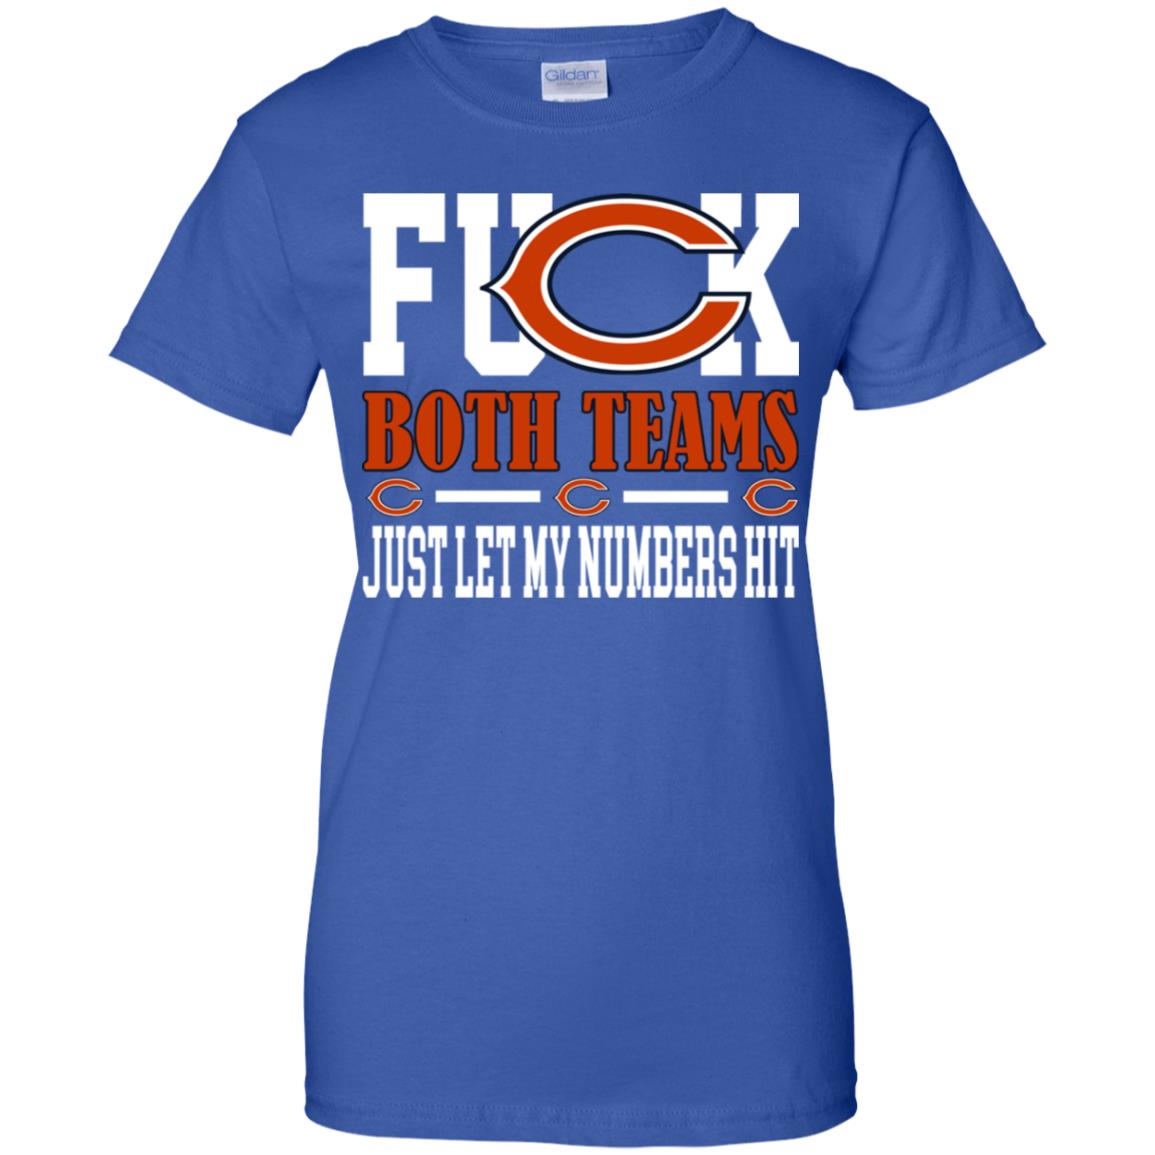 chicago bears t shirts for women